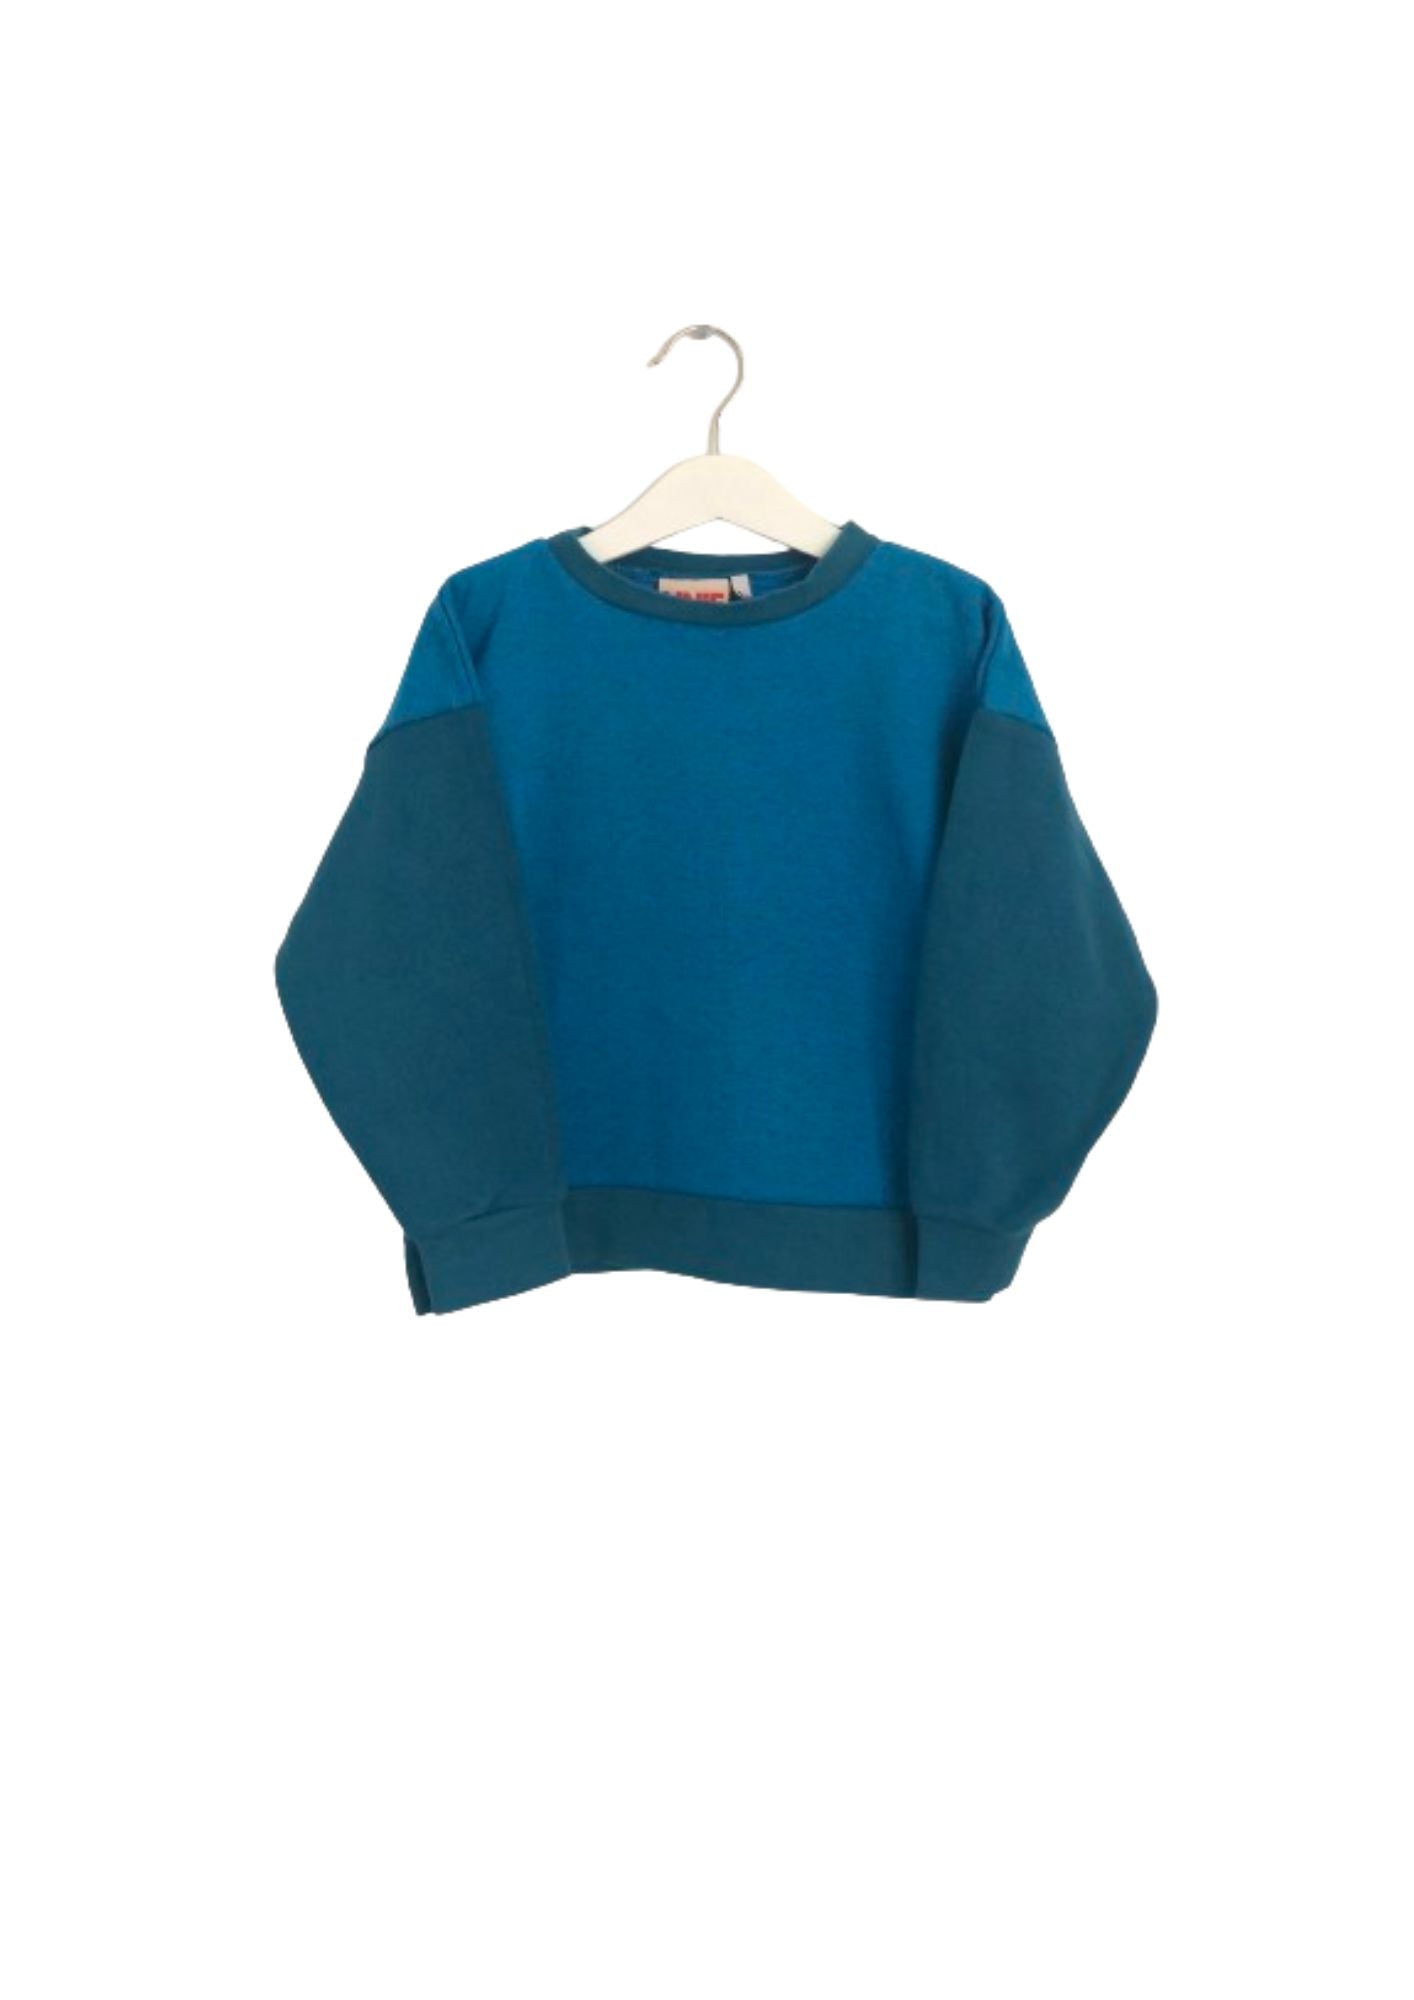 SWEAT JERRY 4 ANS TURQUOISE